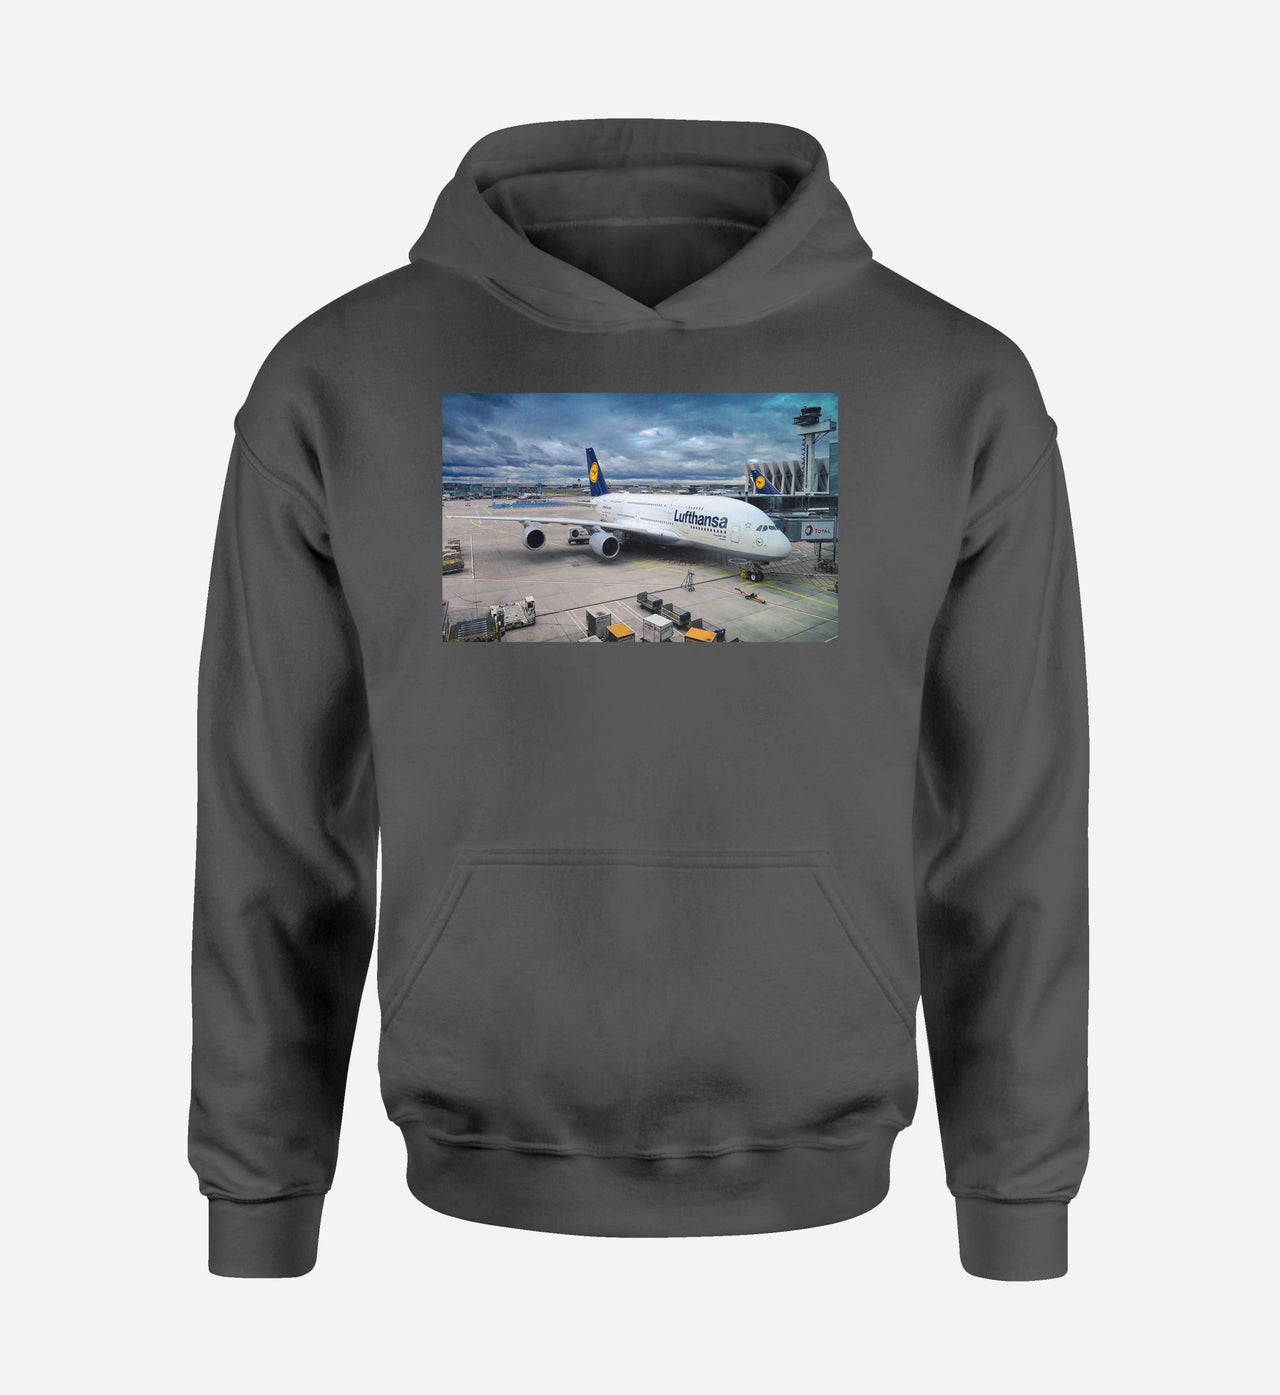 Lufthansa's A380 At The Gate Designed Hoodies